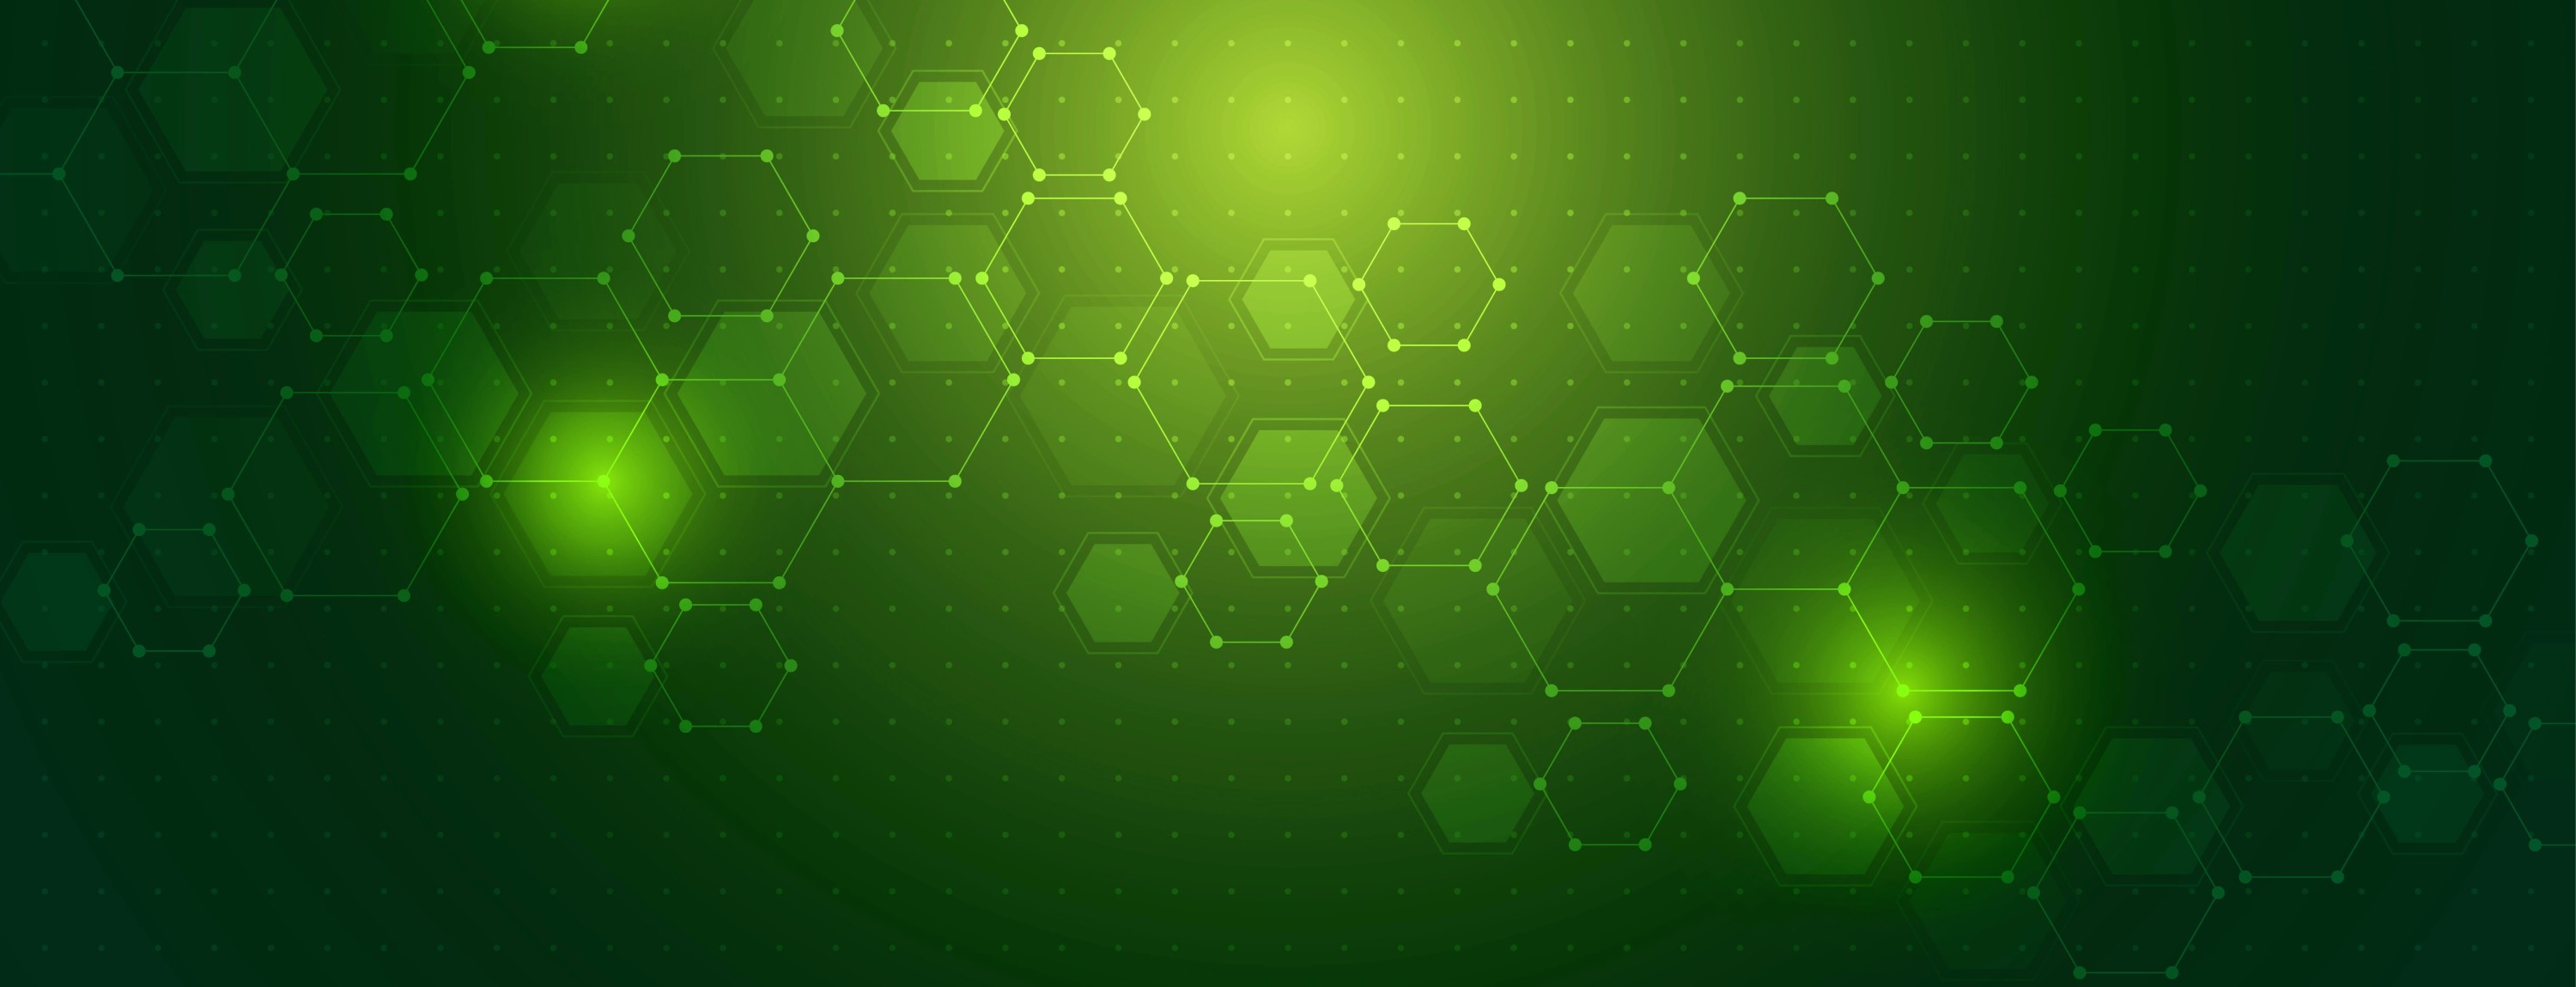 Green background image with light green dots and light green hexagon shapes